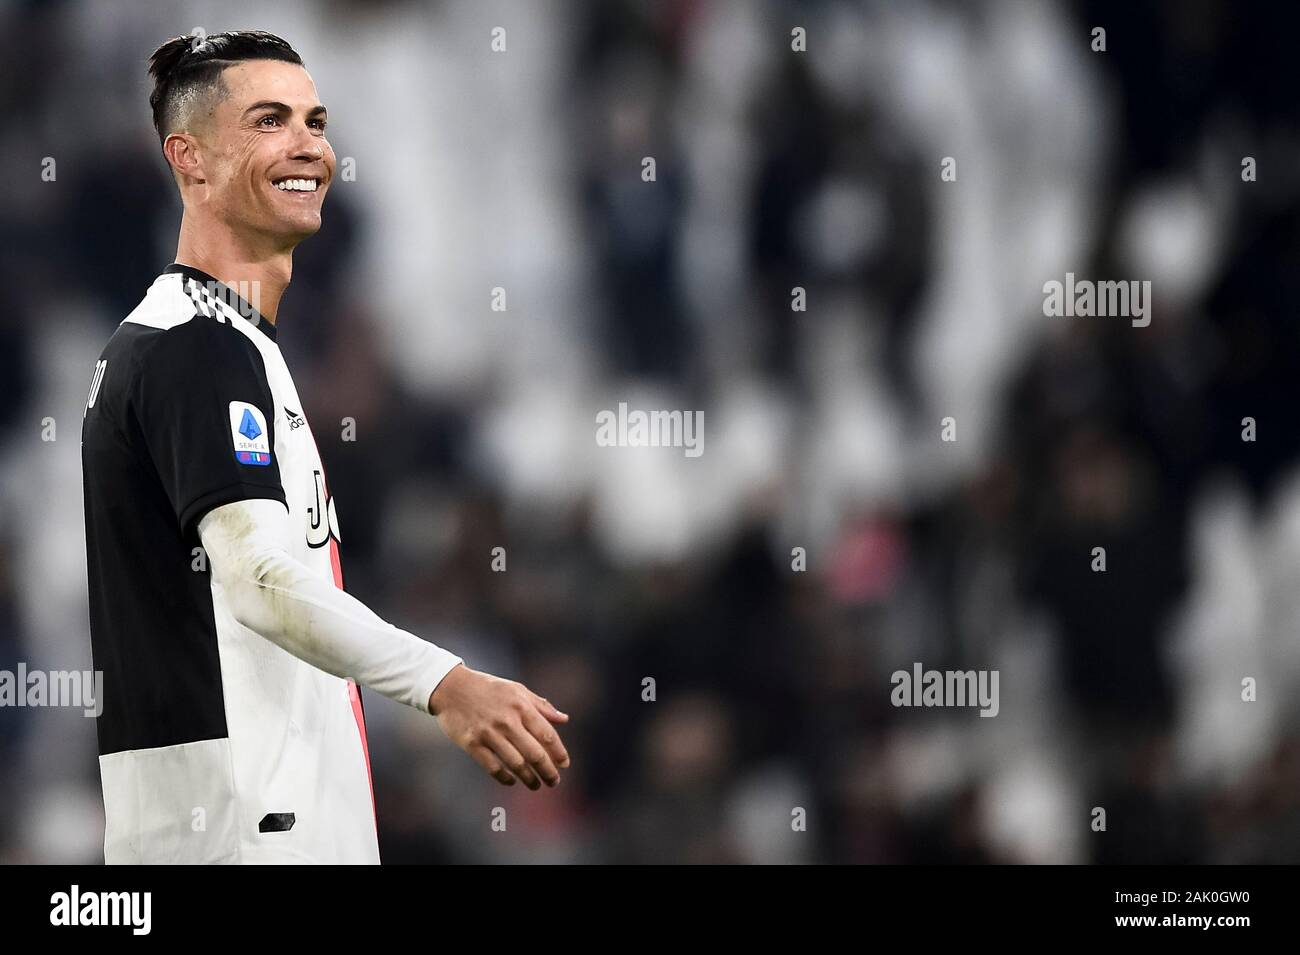 Turin, Italy - 06 January, 2020: Cristiano Ronaldo of Juventus FC smiles at the end of the Serie A football match between Juventus FC and Cagliari Calcio. Juventus FC won 4-0 over Cagliari Calcio. Credit: Nicolò Campo/Alamy Live News Stock Photo